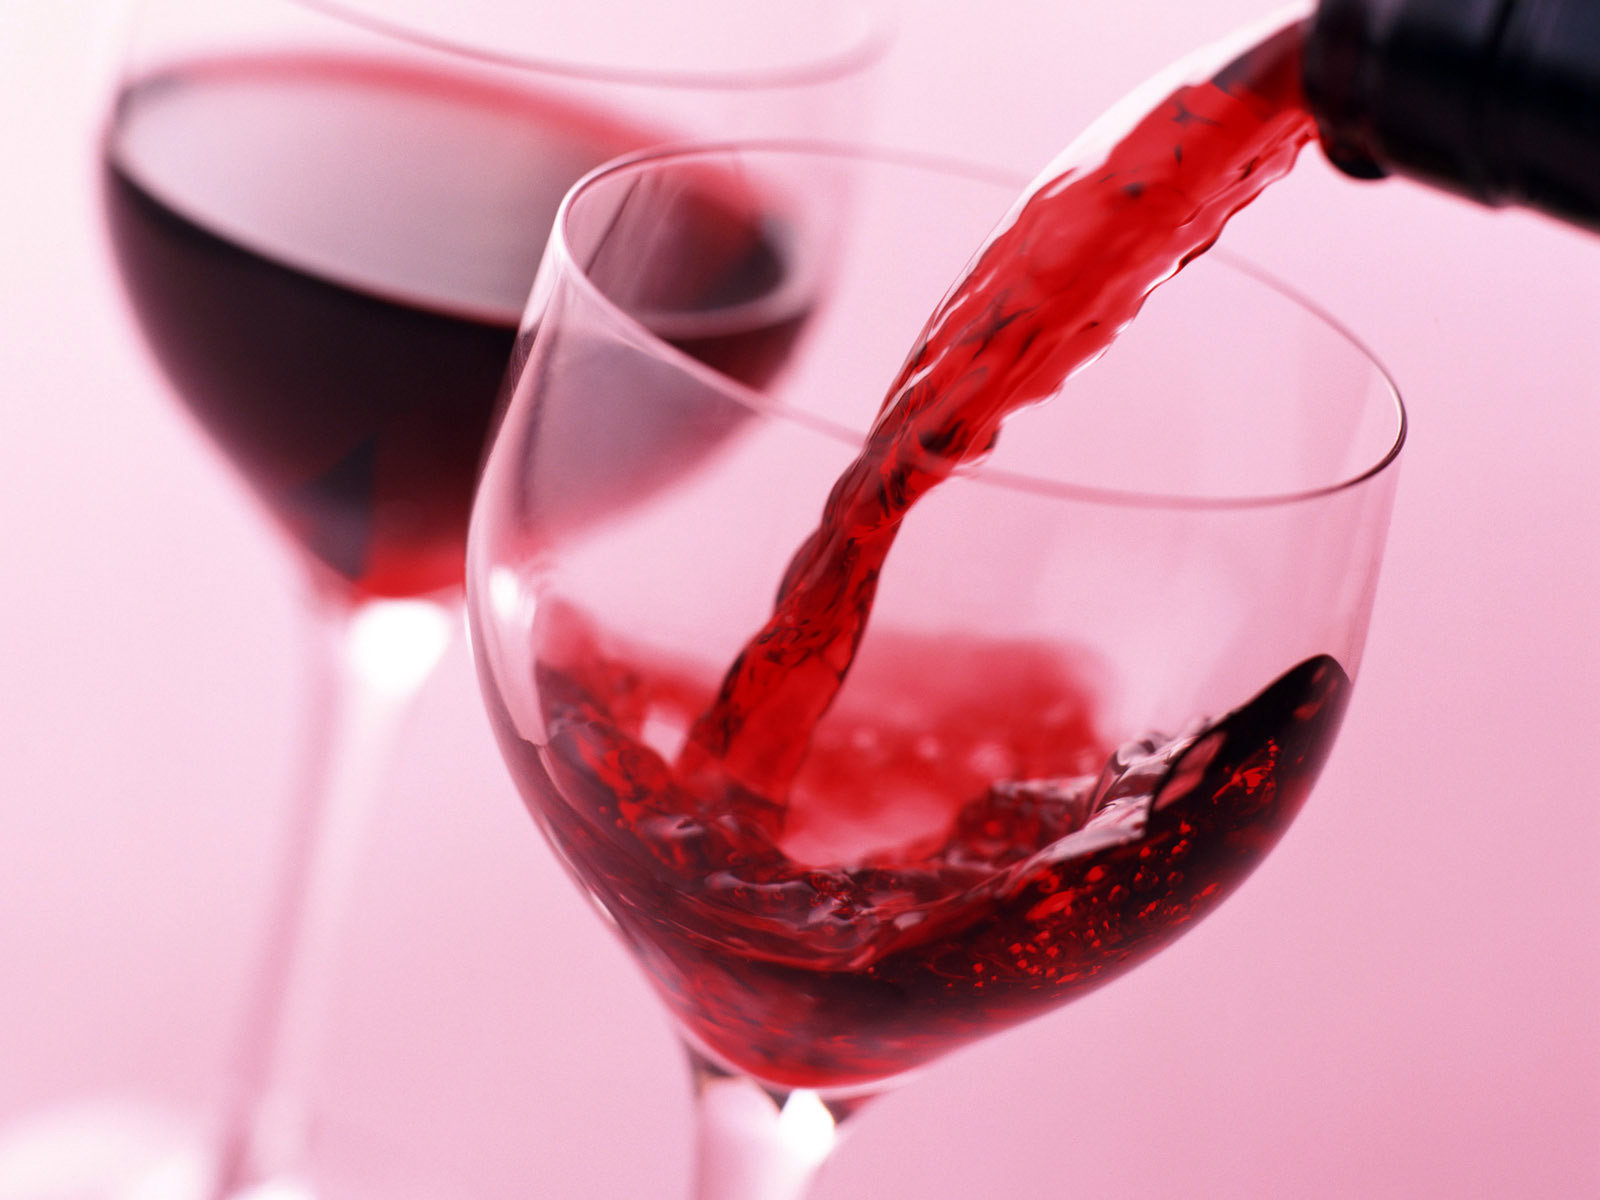 Red Wine Has No Special Protective Qualities Say Health Experts